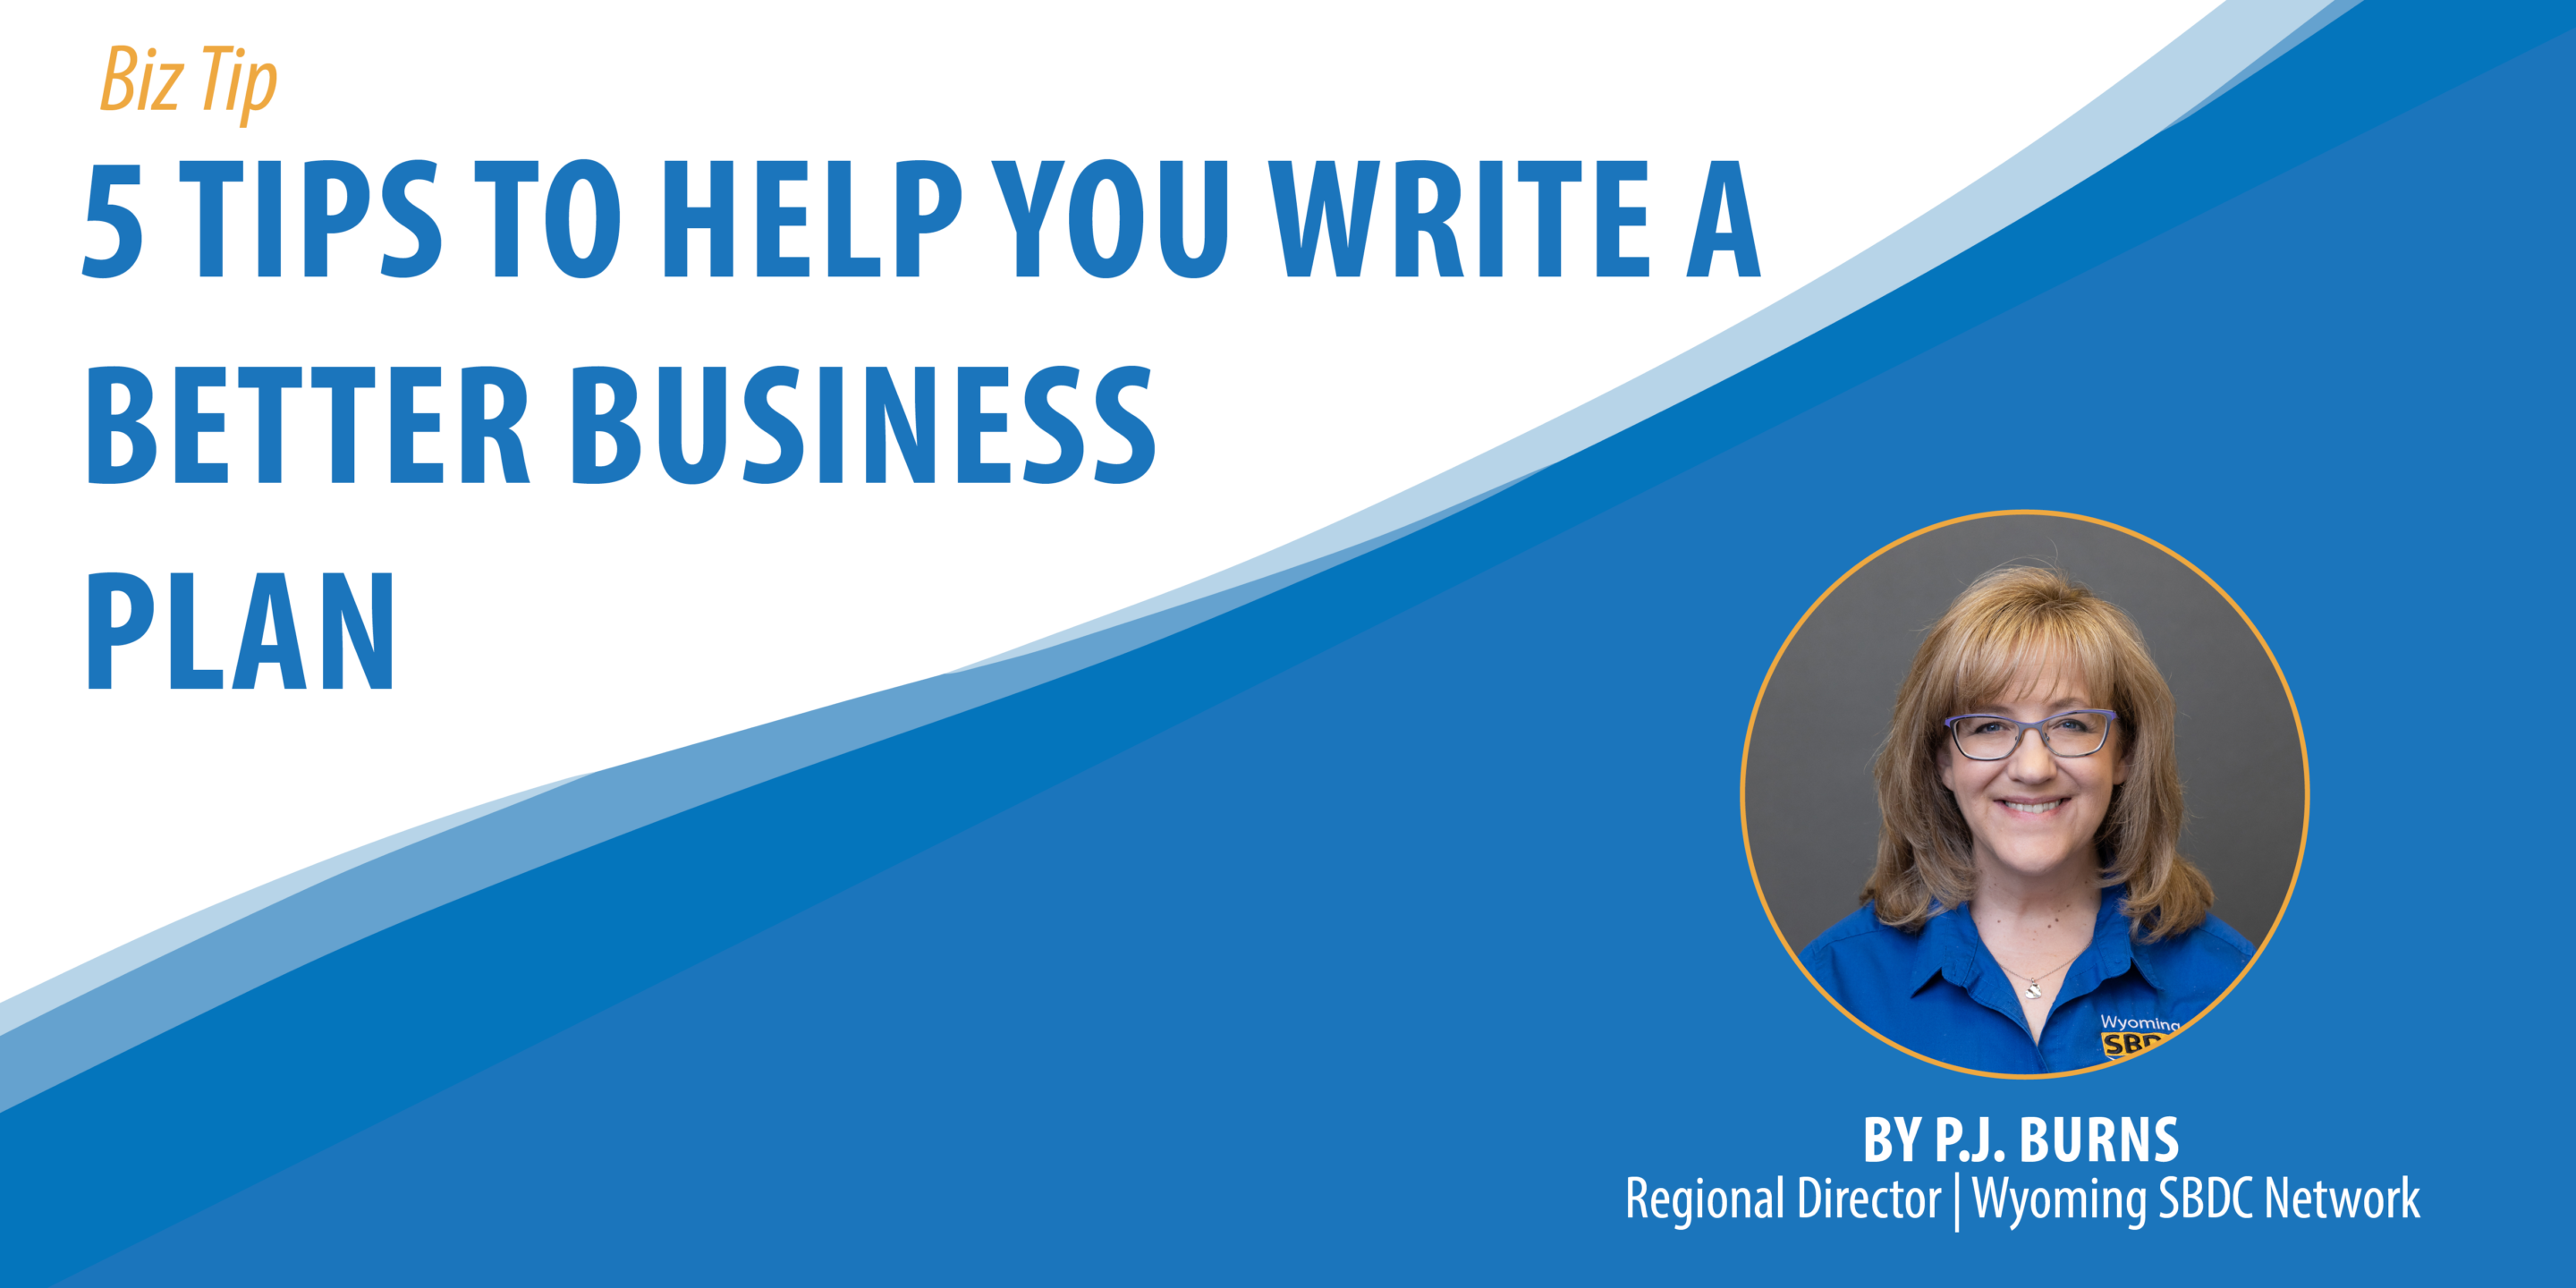 5 Tips to Help You Write A Better Business Plan